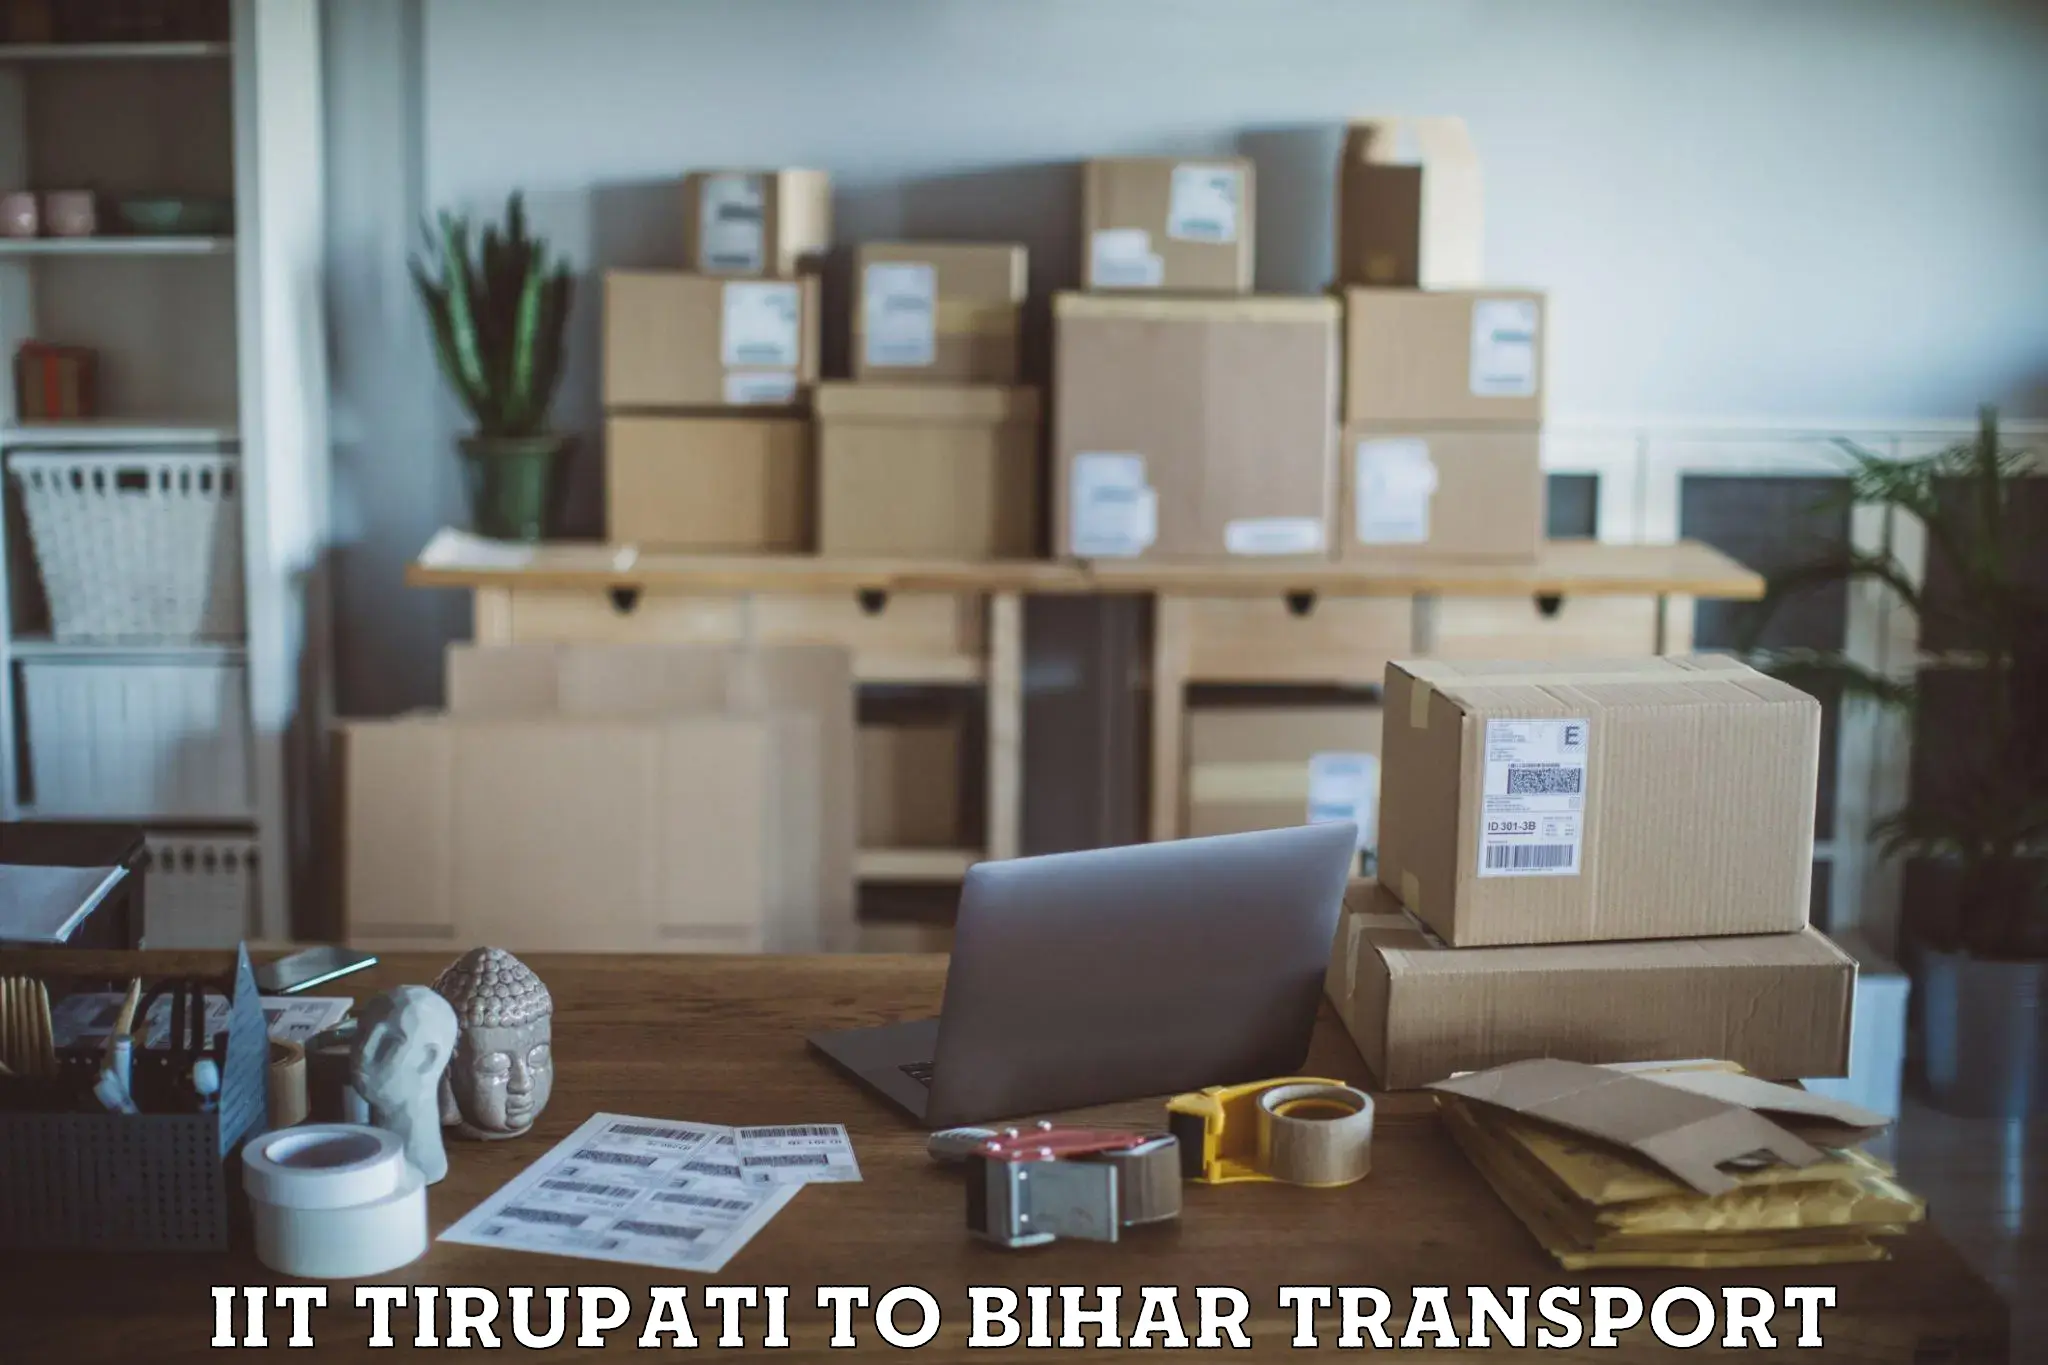 Transport bike from one state to another IIT Tirupati to Baniapur